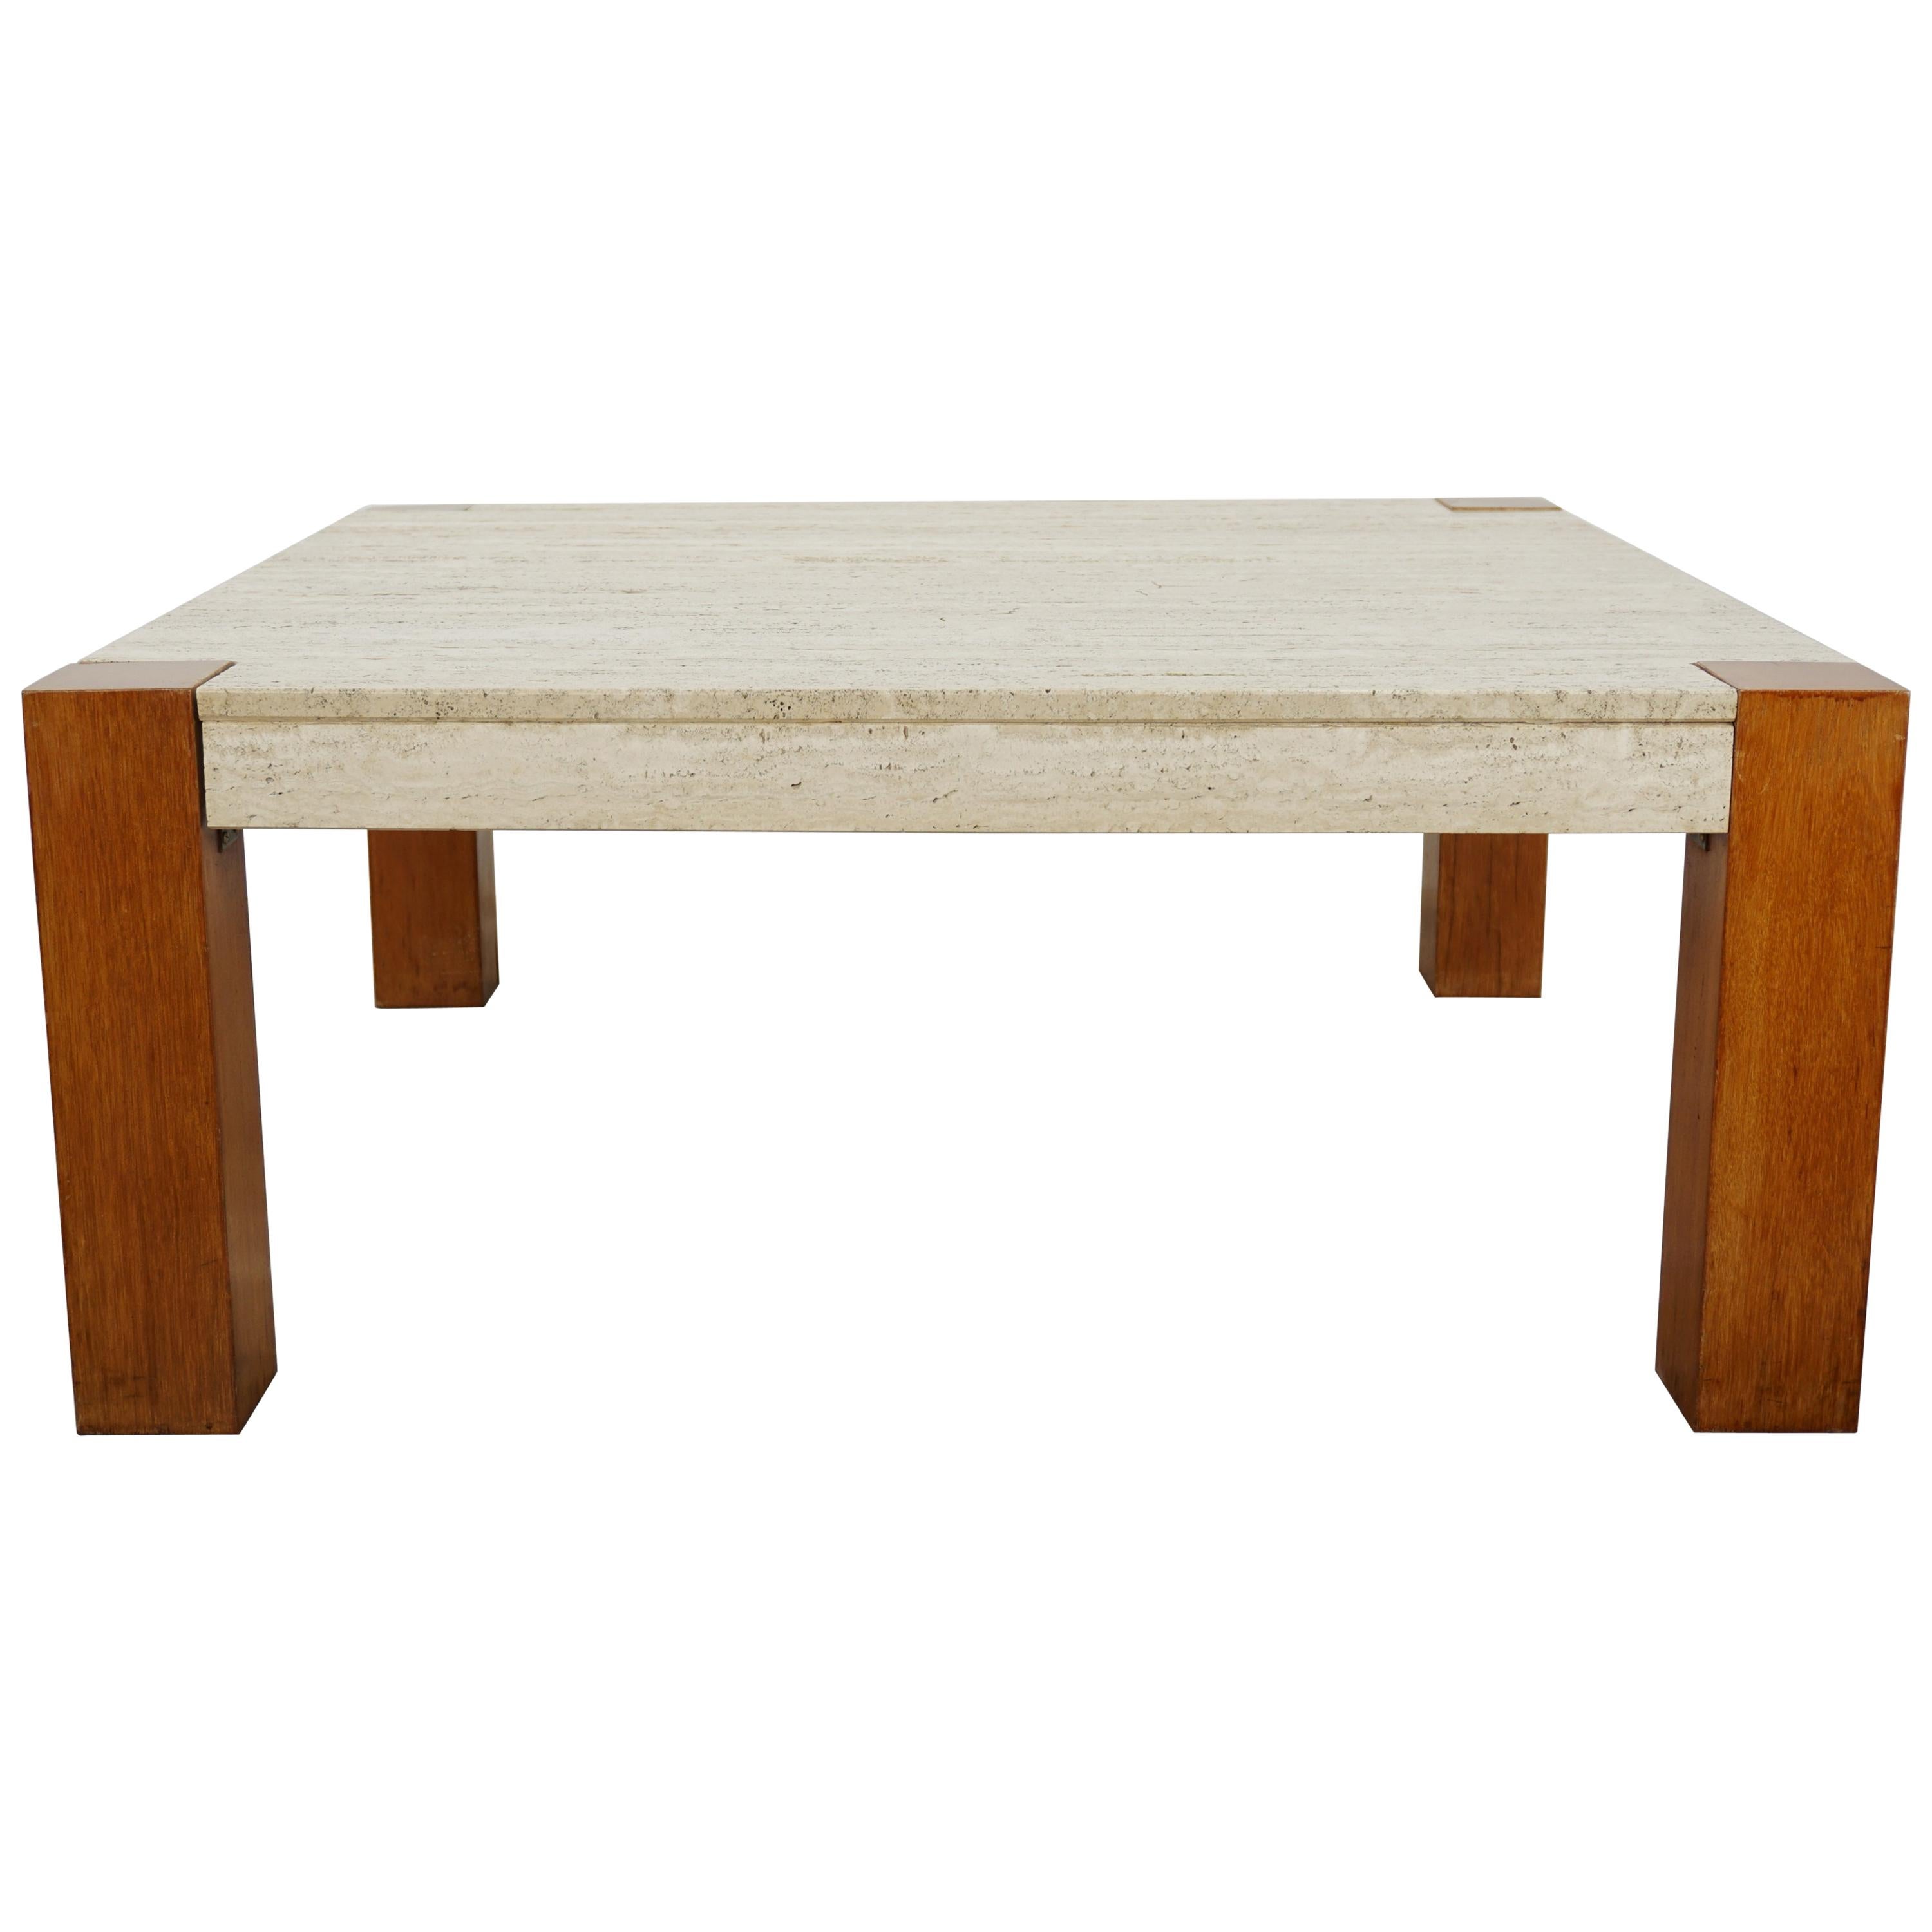 Travertine and Wood 1960s Design Large Square Coffee Table